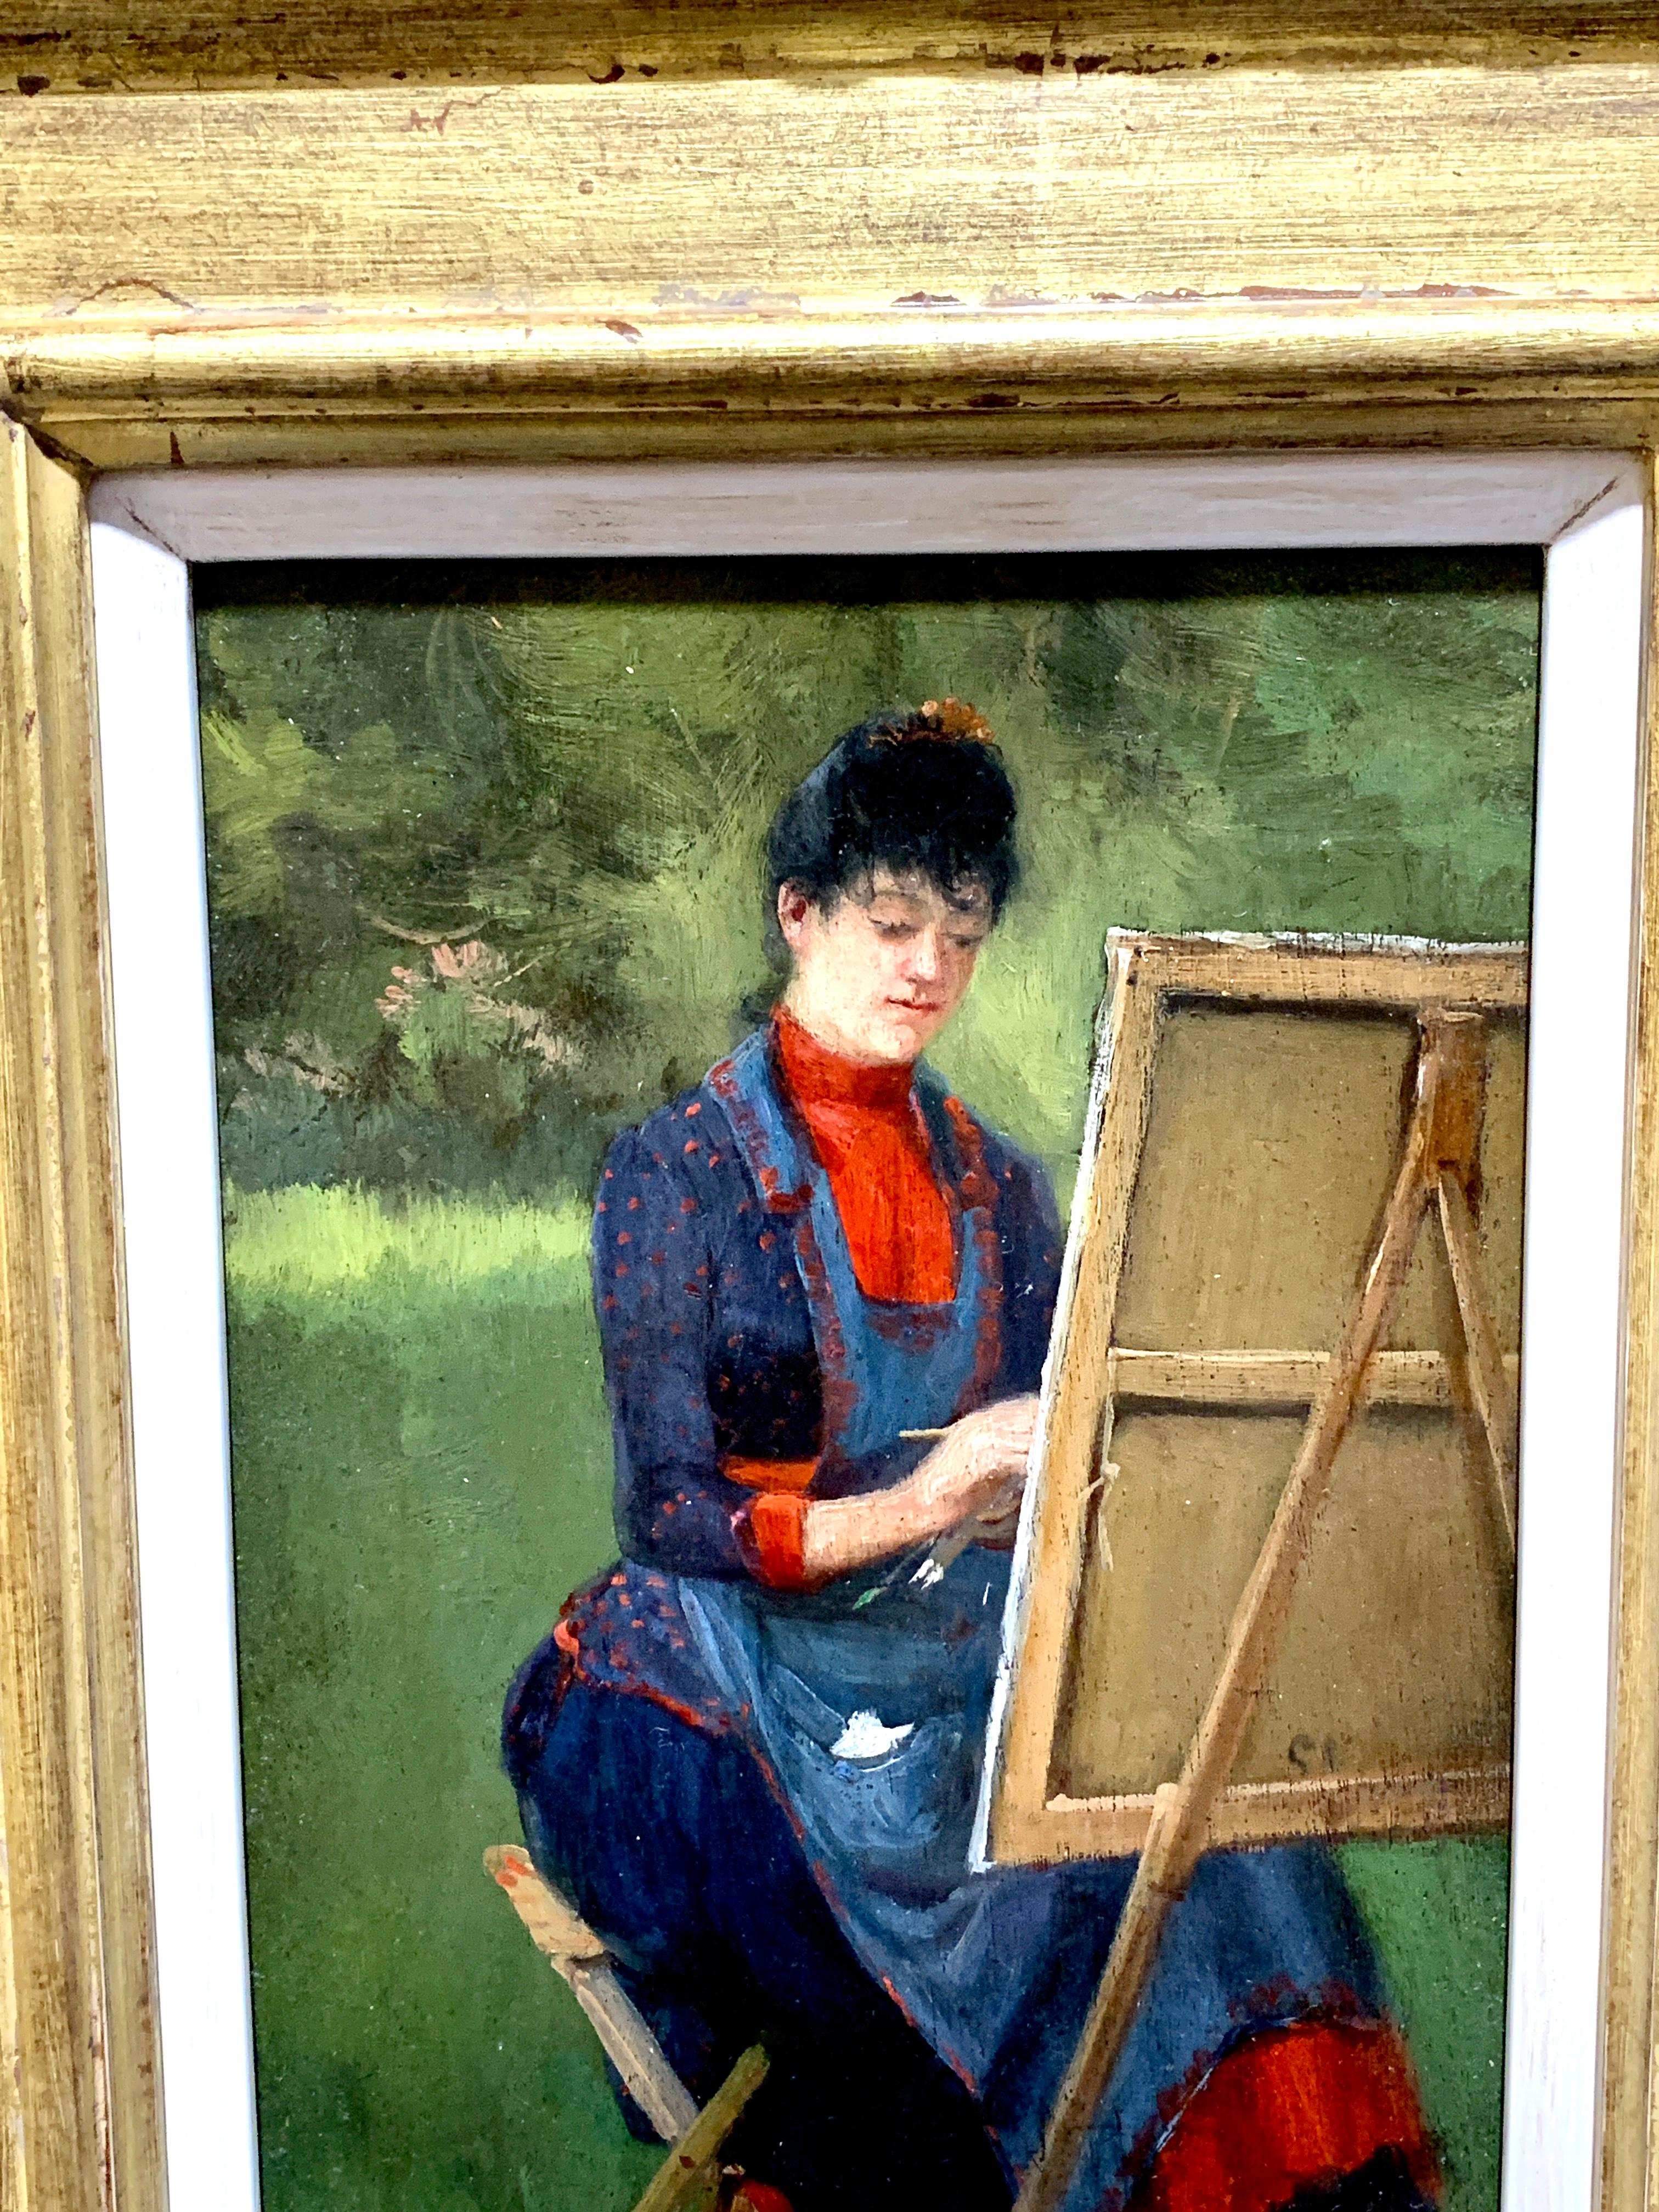 Study of a Woman artist painting by her easel in a landscape - Painting by Unknown